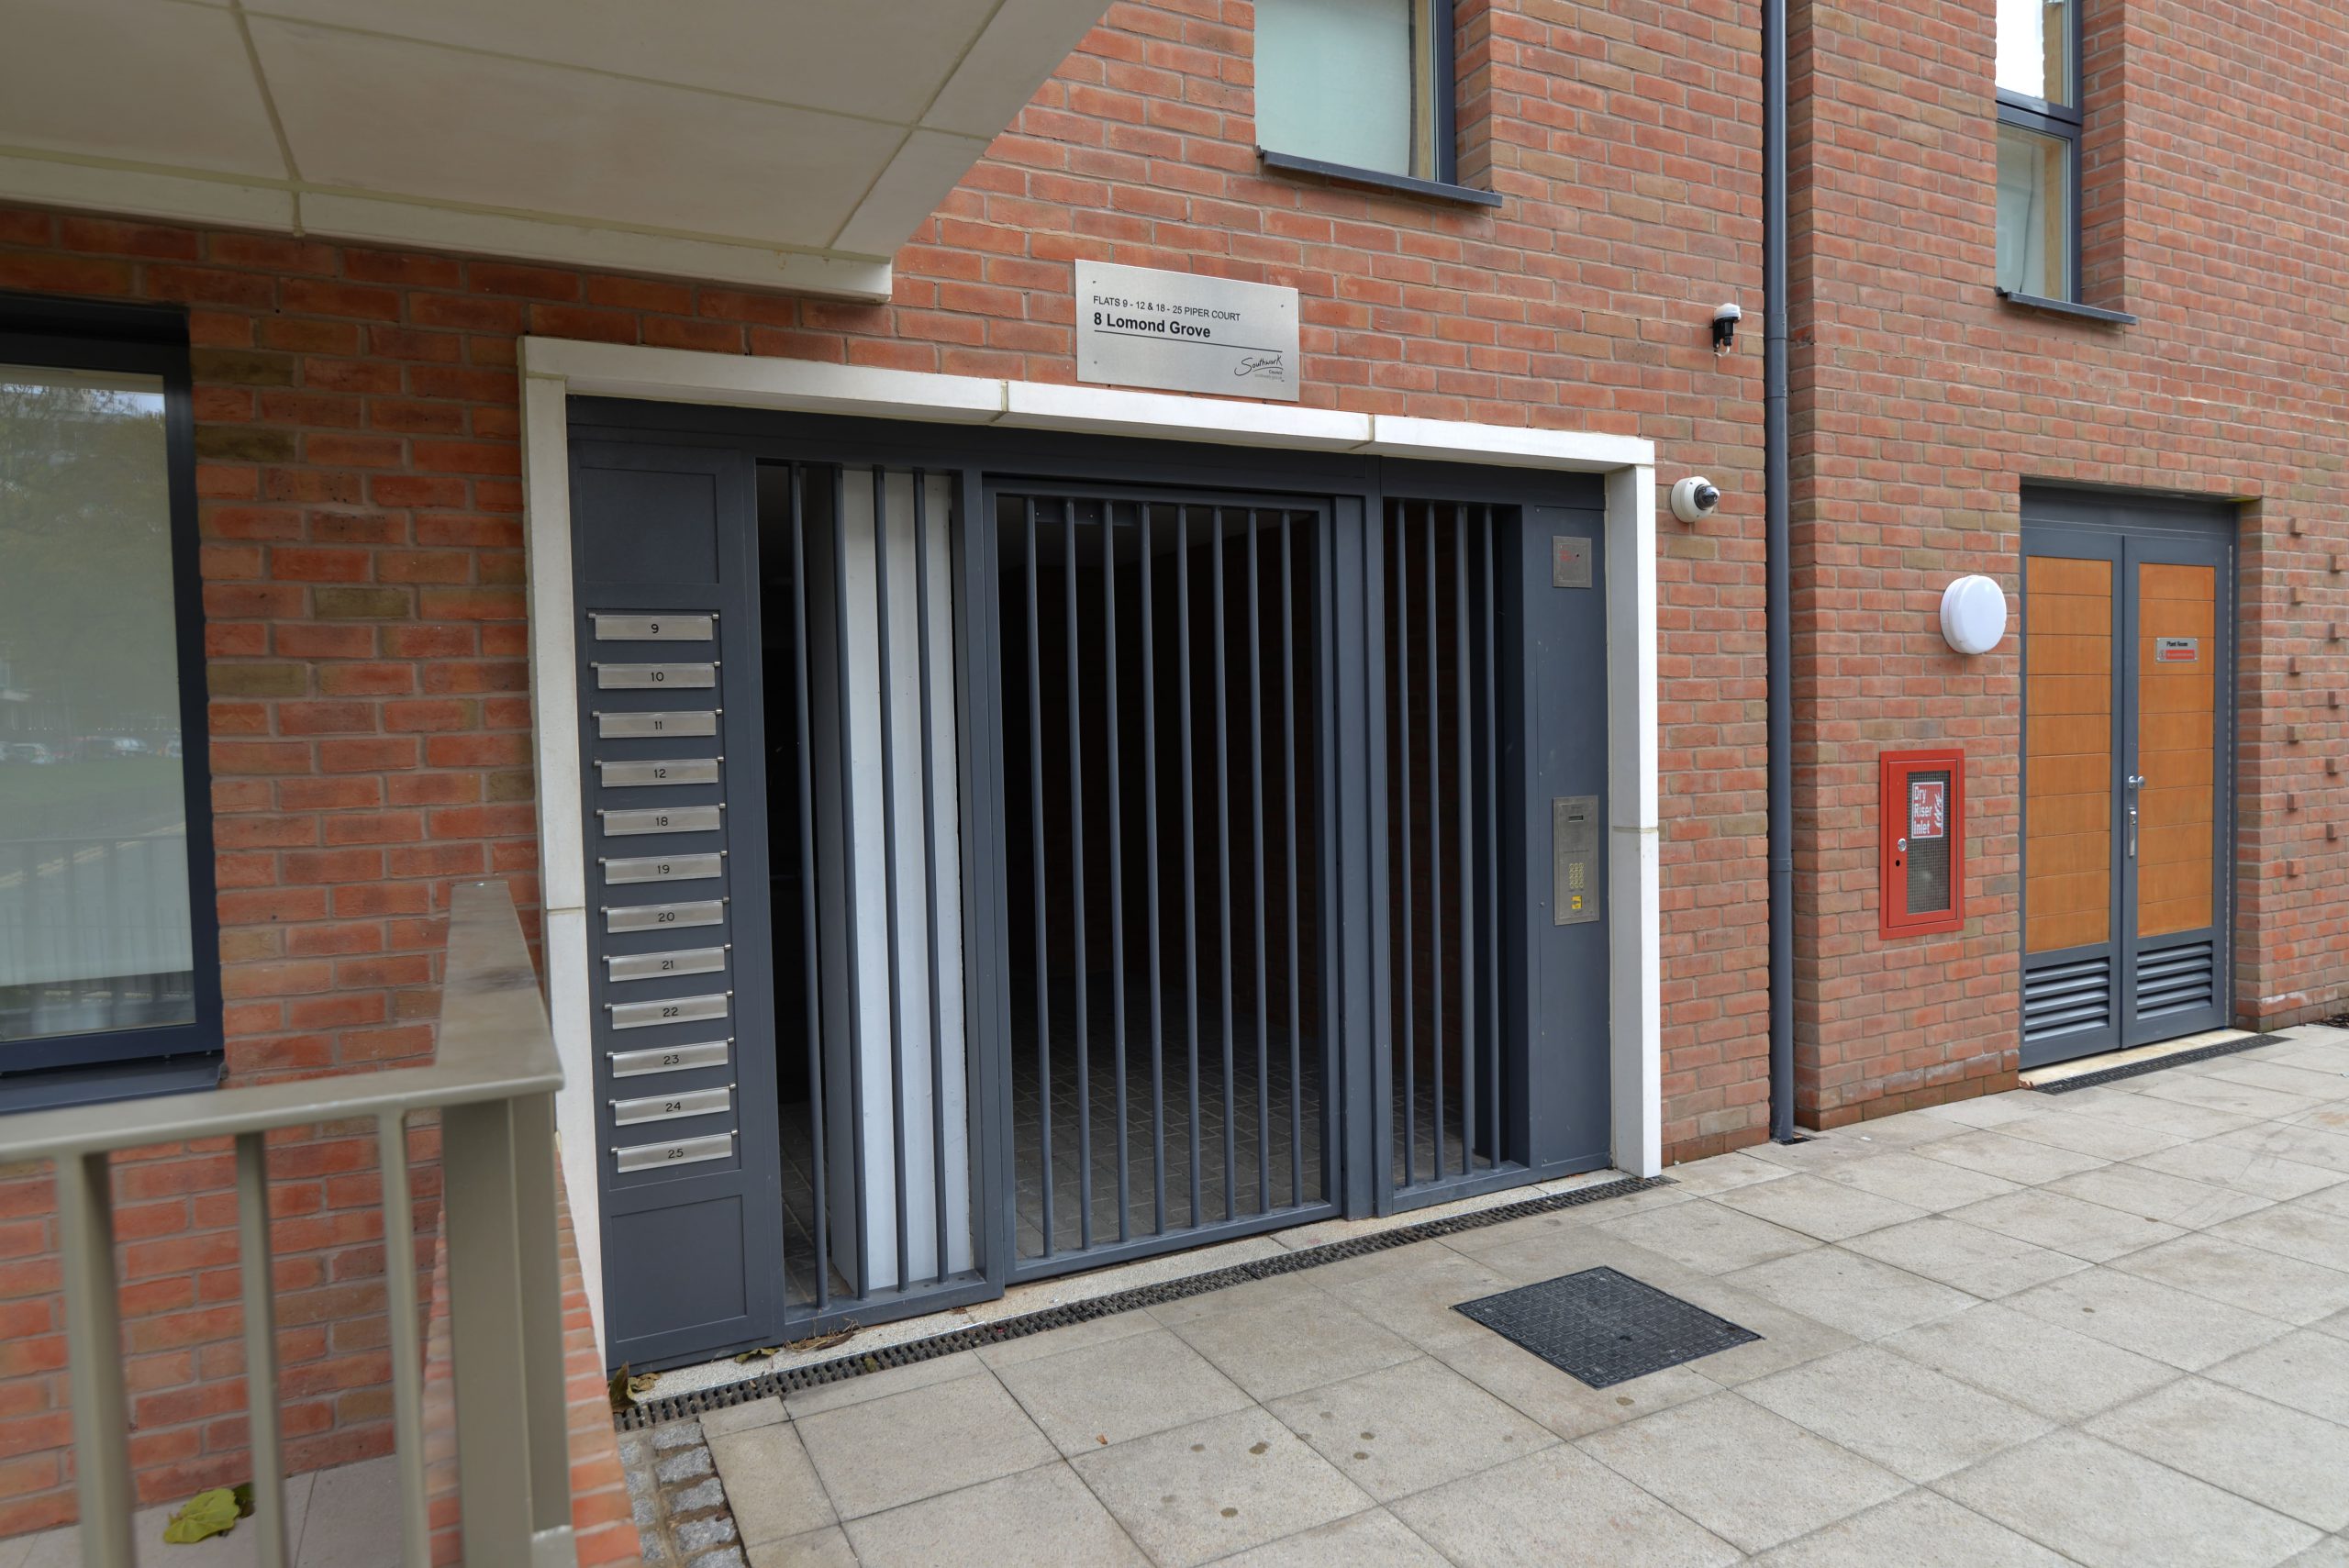 INDUSTRIAL STEEL GATES AND INTEGRATED MAIL BOX SYSTEM FABRICATED TO LPS1175 SR2 AND PAS24 STANDARD. PRODUCED AND INSTALLED BY PREMIER SECURITY CONSULTANTS LTD.